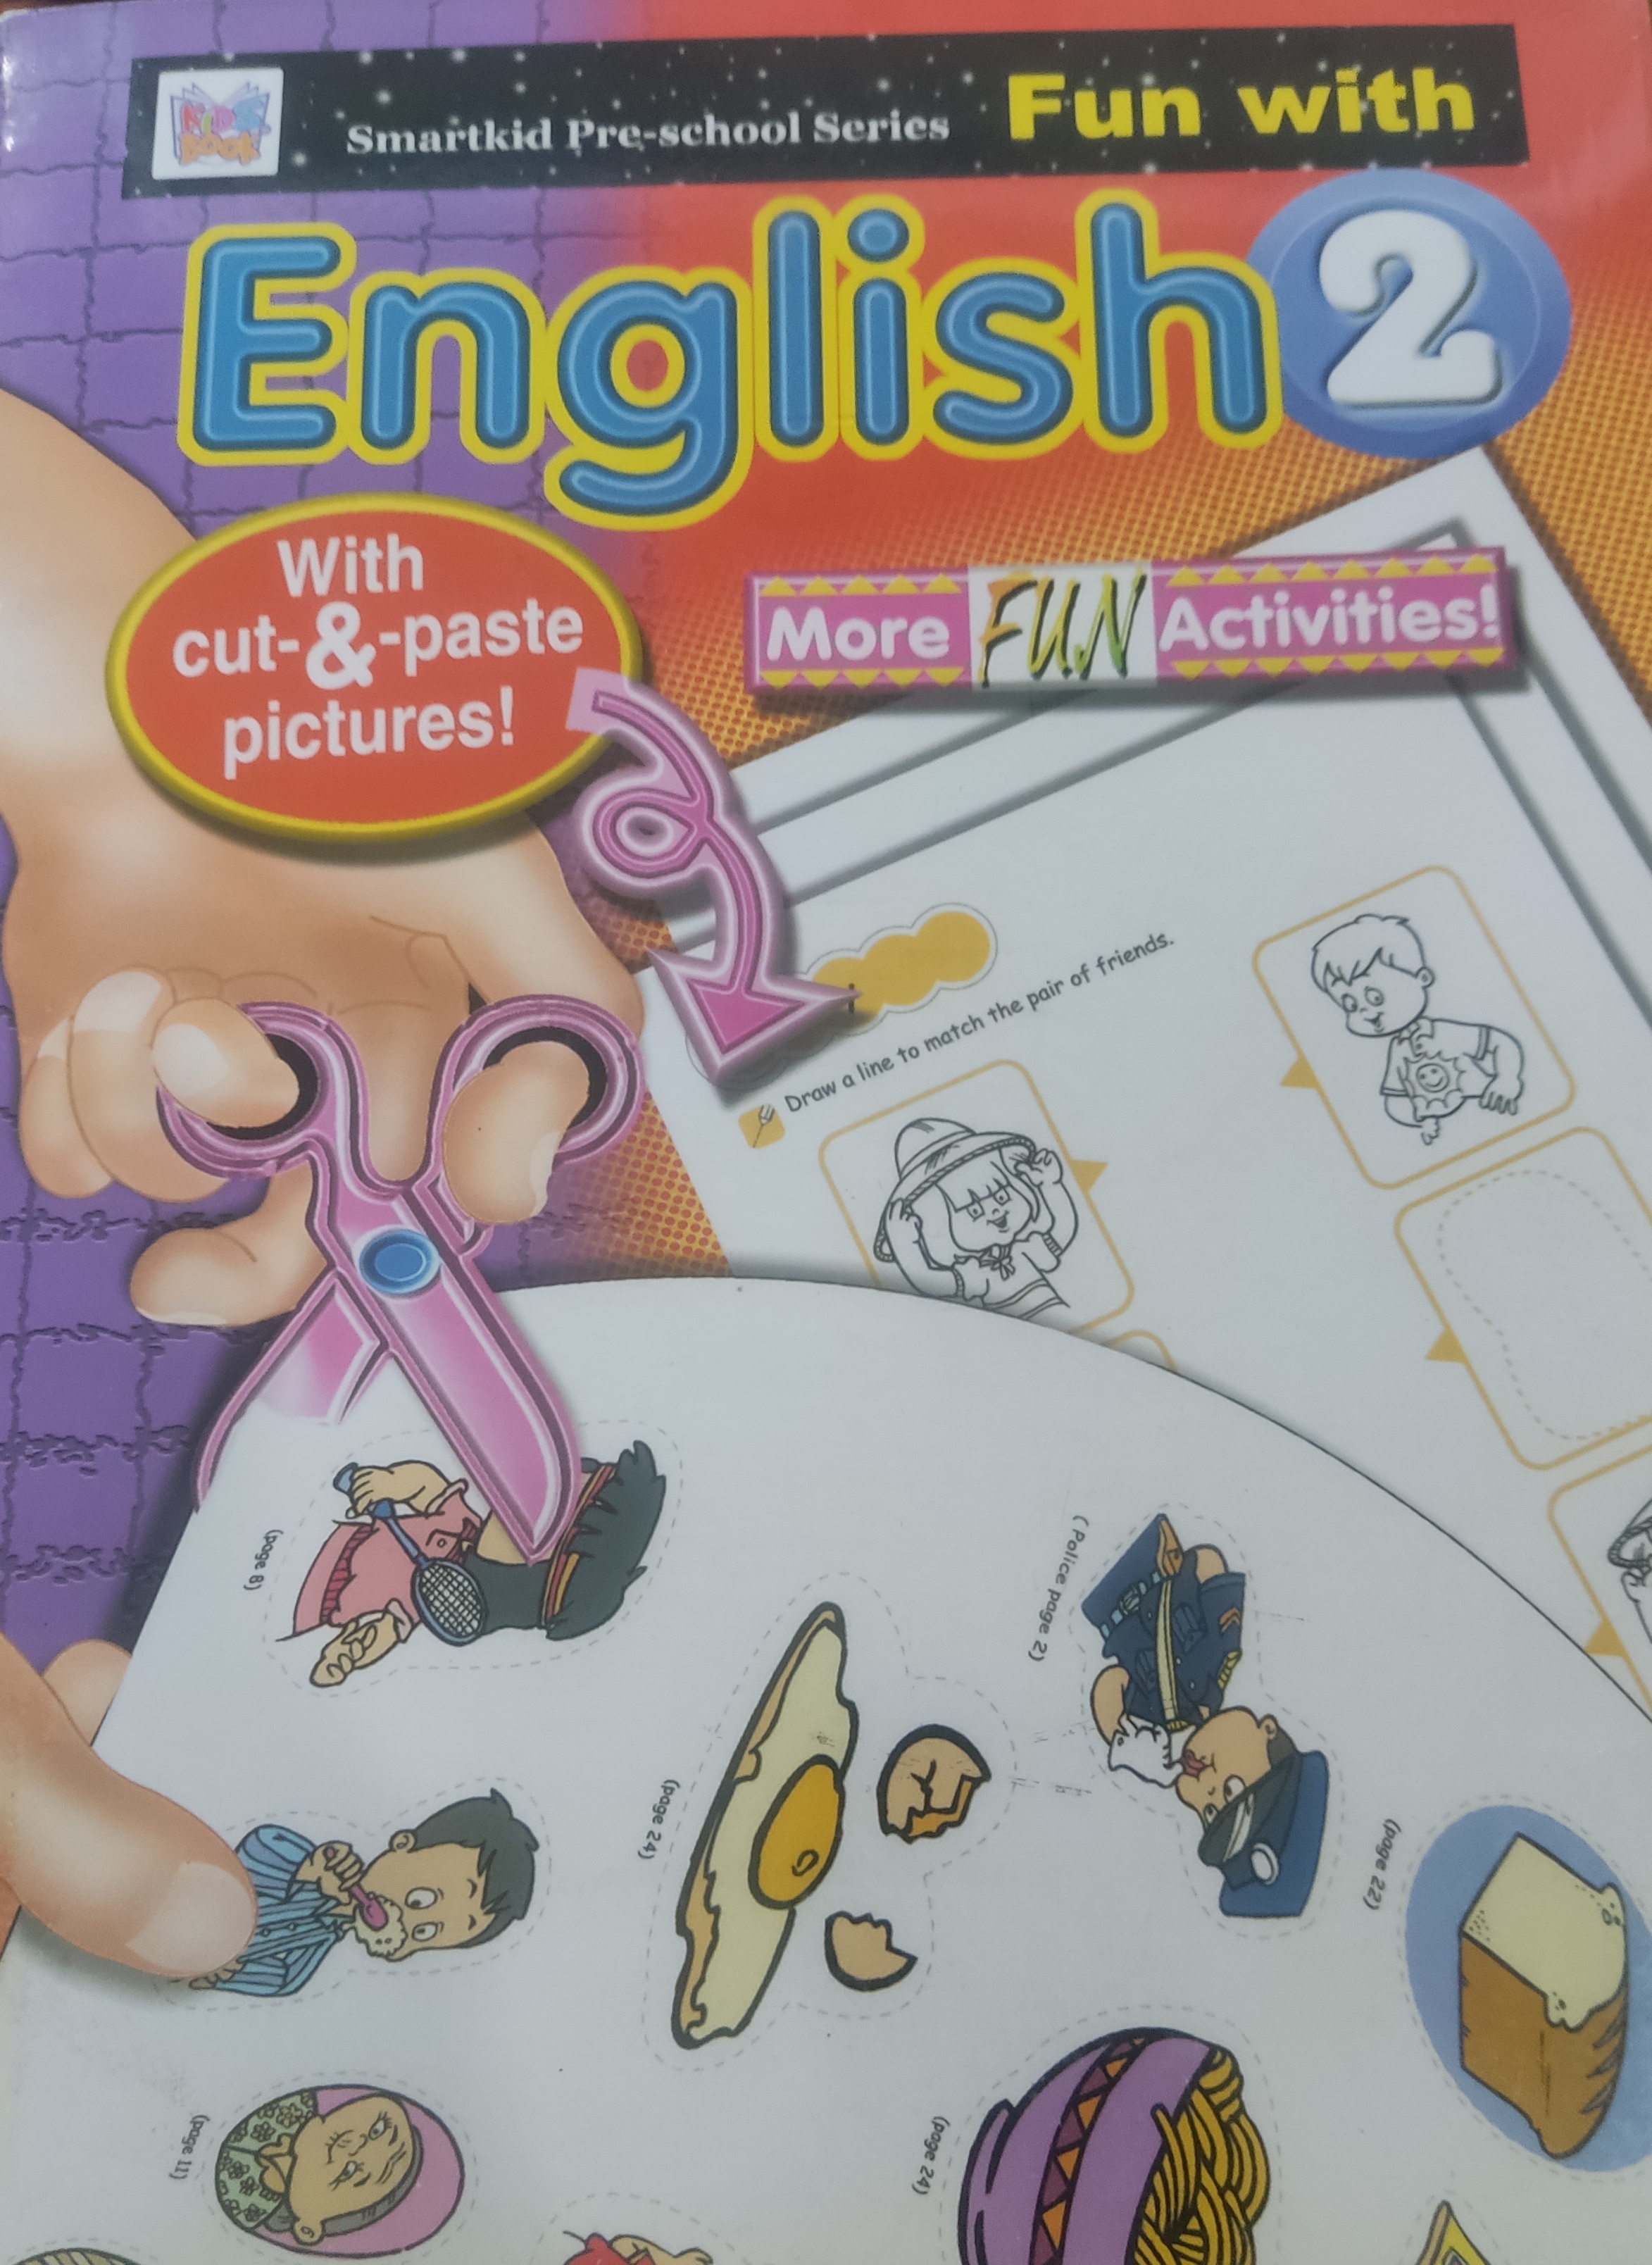 Smartkid Pre-school Series Fun With :  English 2